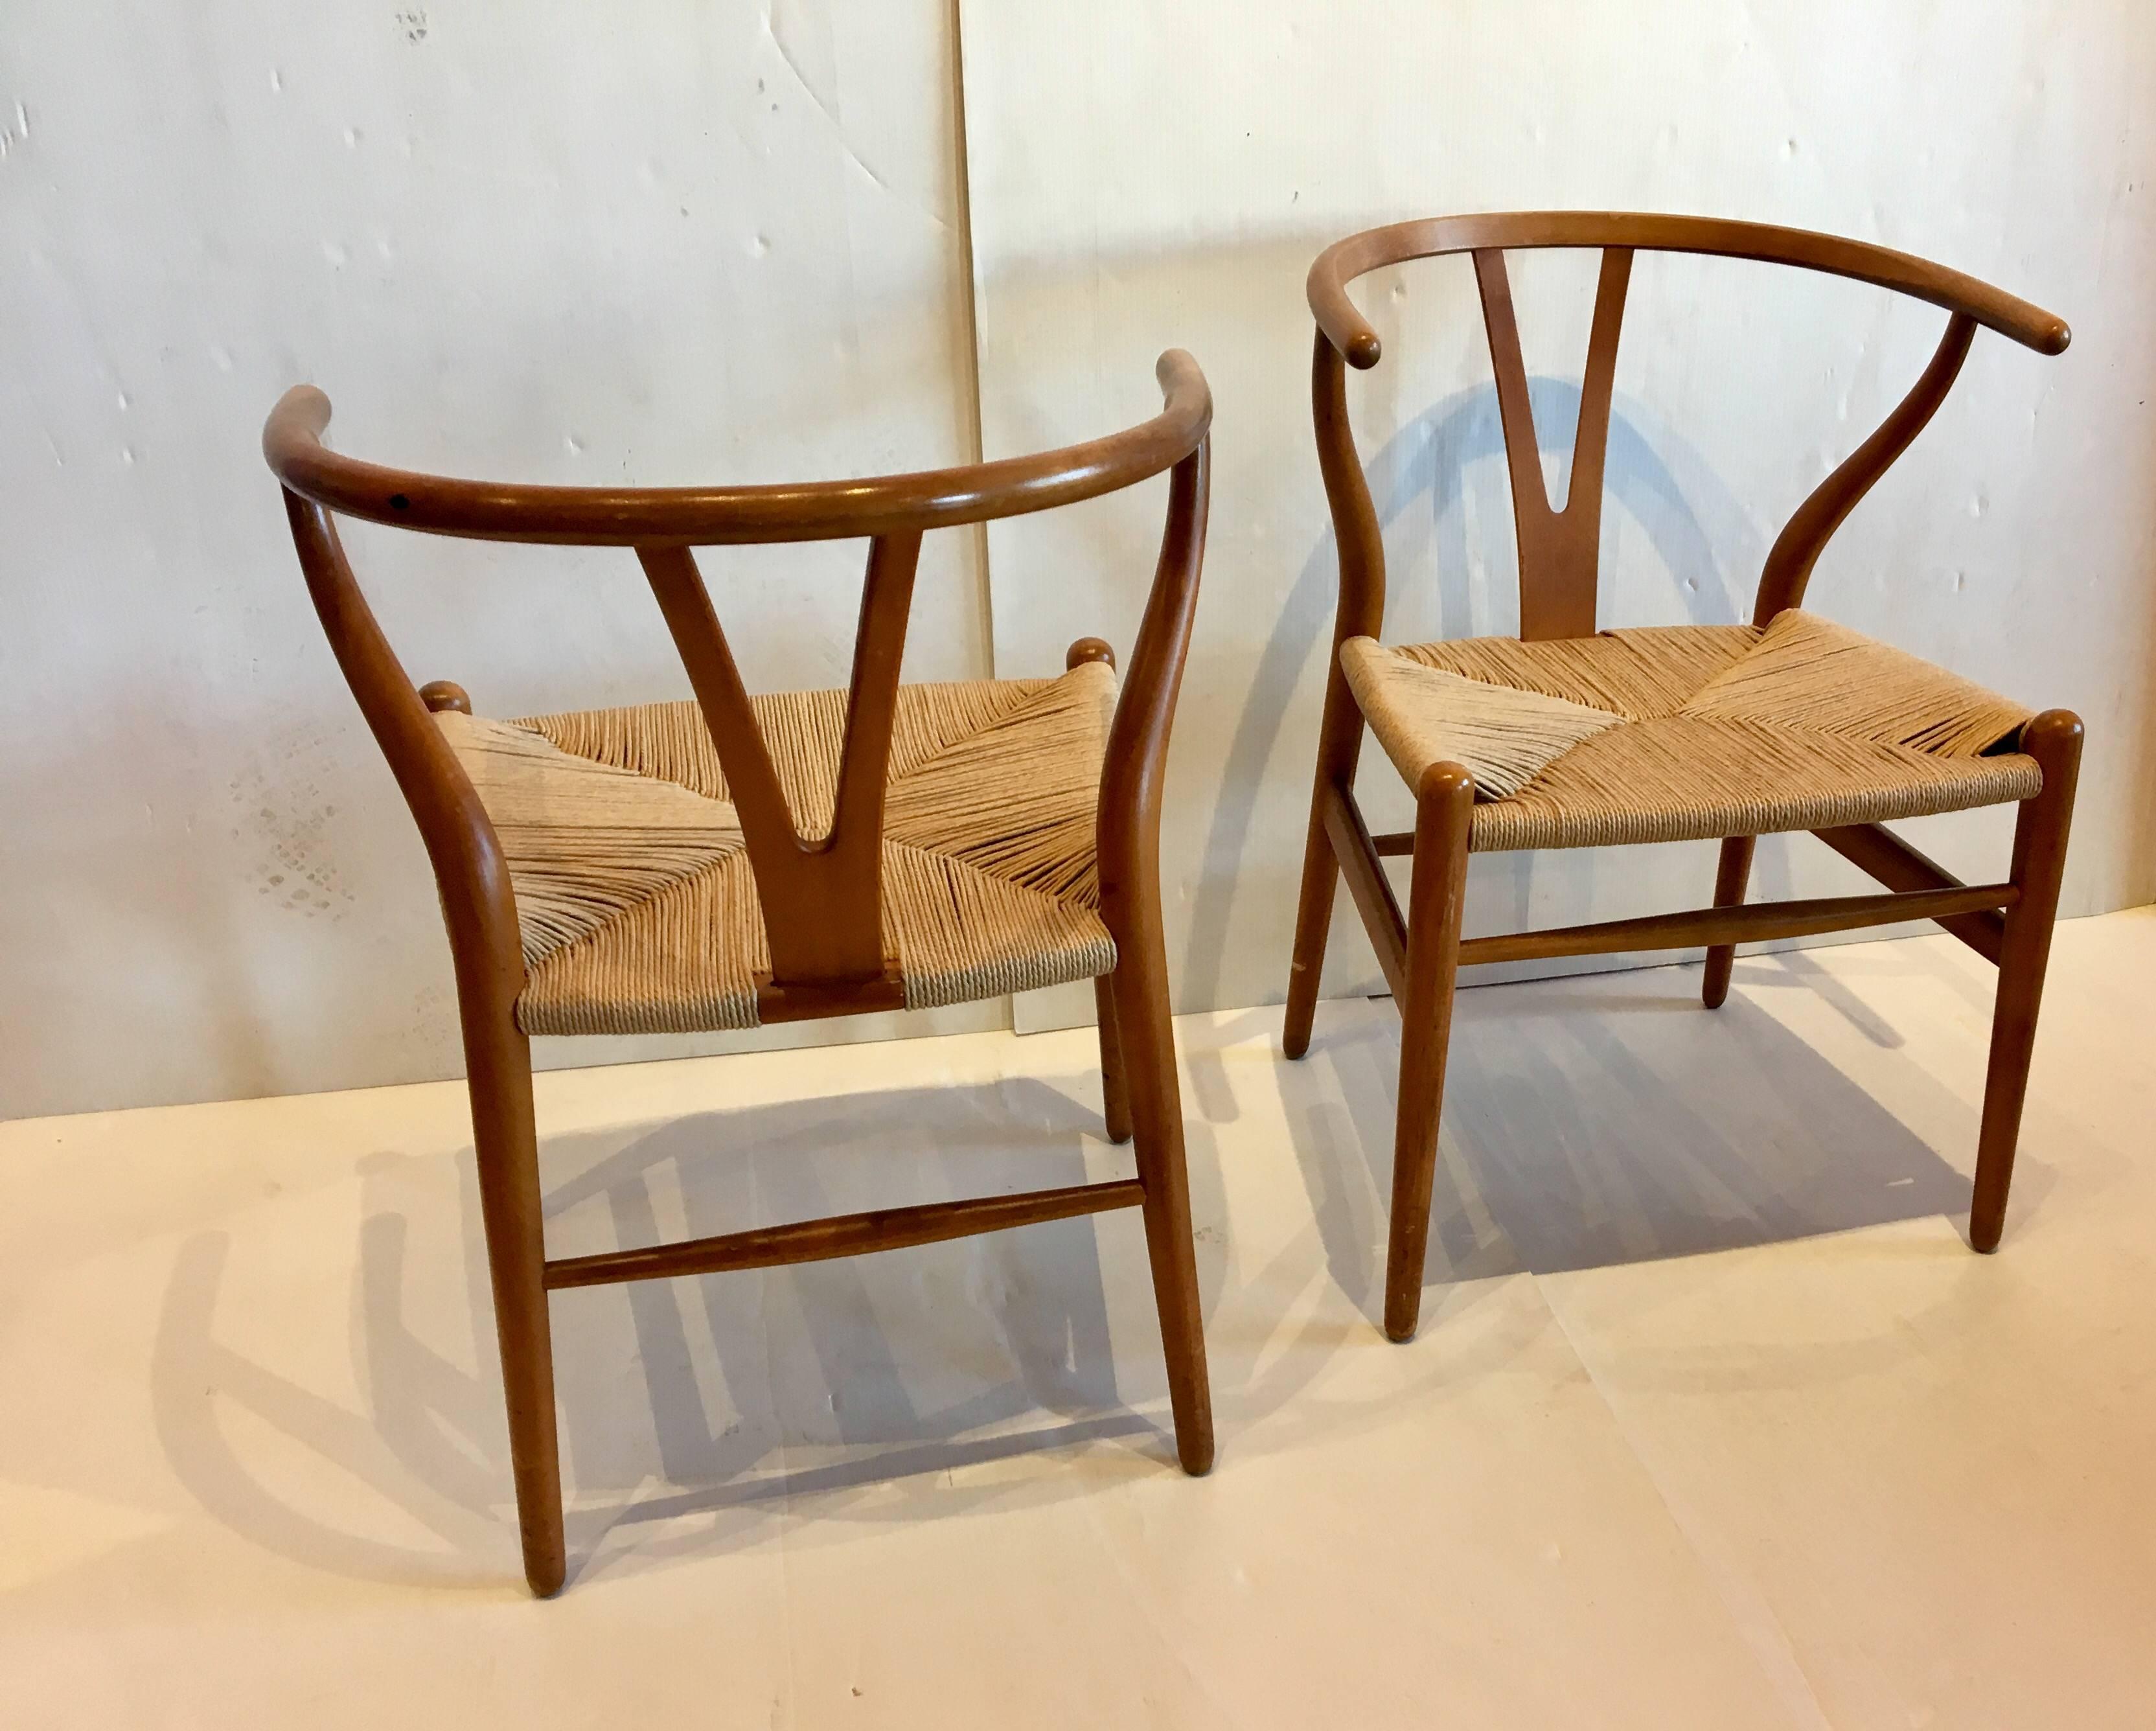 Nice pair of Wishbone chairs design by Hans Wegner, with original rope seats, great condition in birchwood finish with a walnut stain.